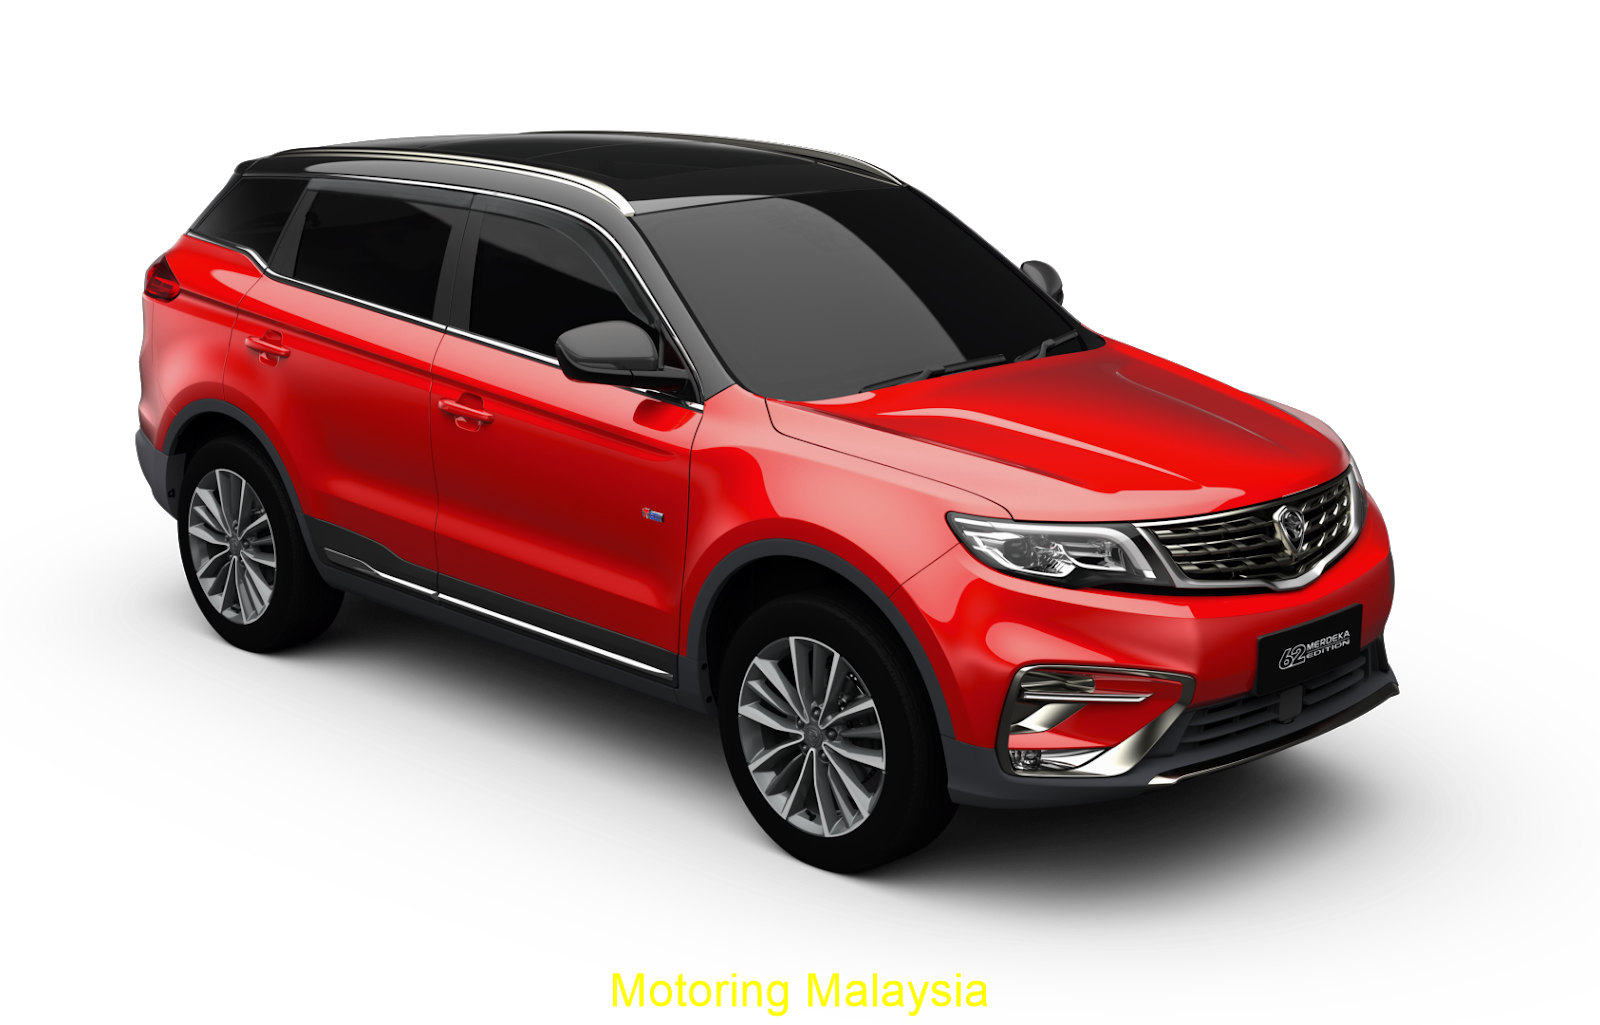 Motoring-Malaysia: Proton Has Launched The X70 ME (MERDEKA EDITION